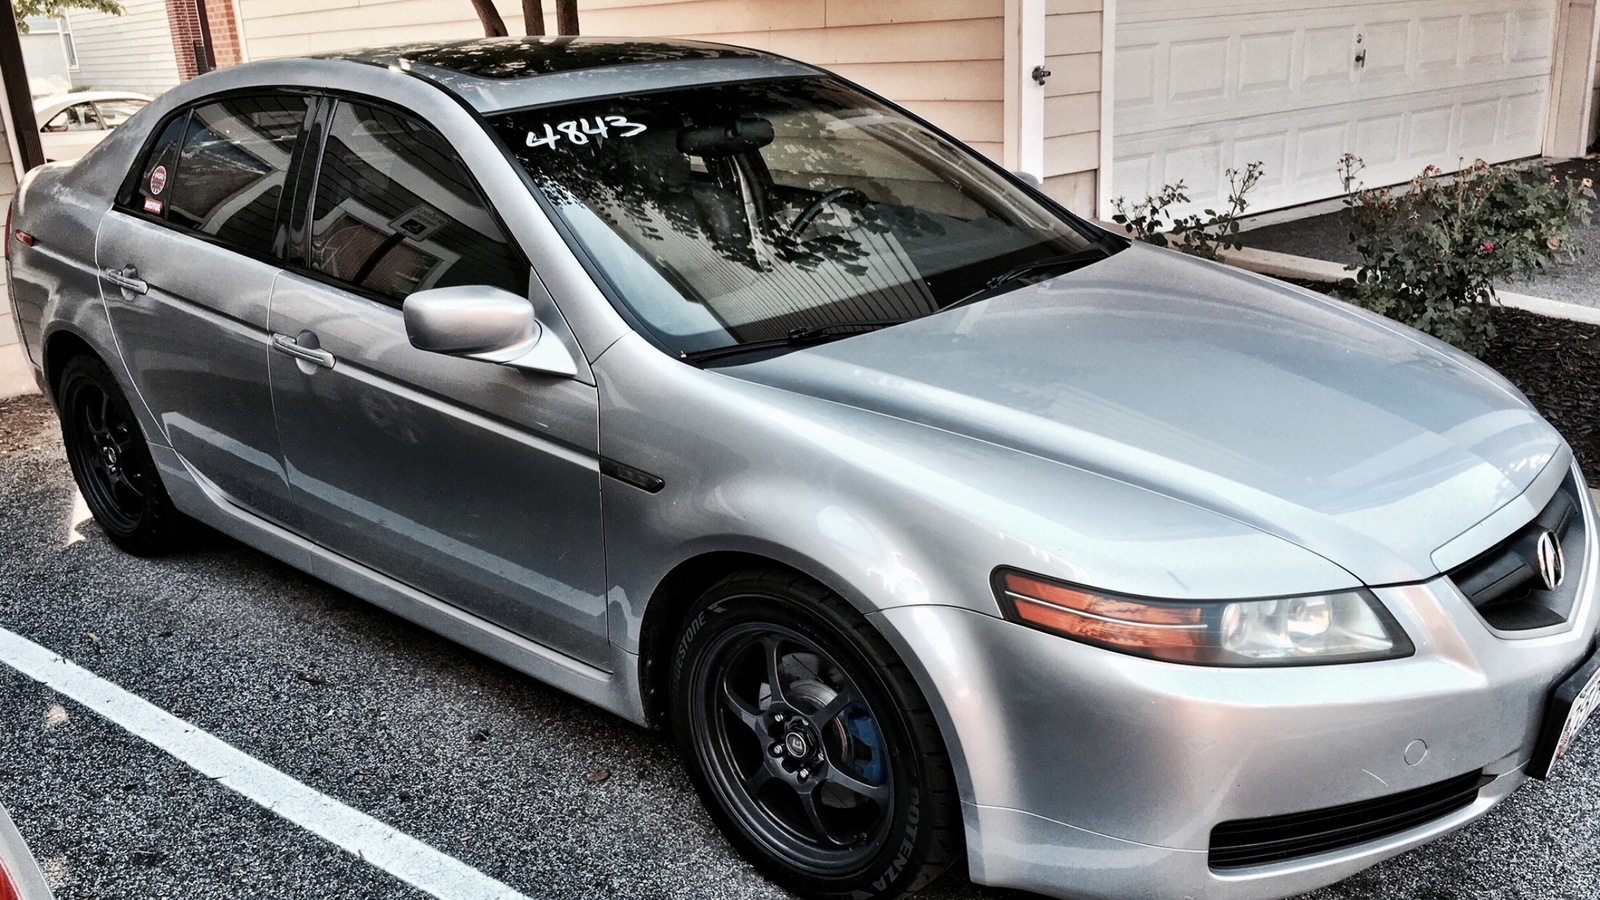 2006 Alabaster Silver Metallic Acura 3.2TL Base 5AT picture, mods, upgrades